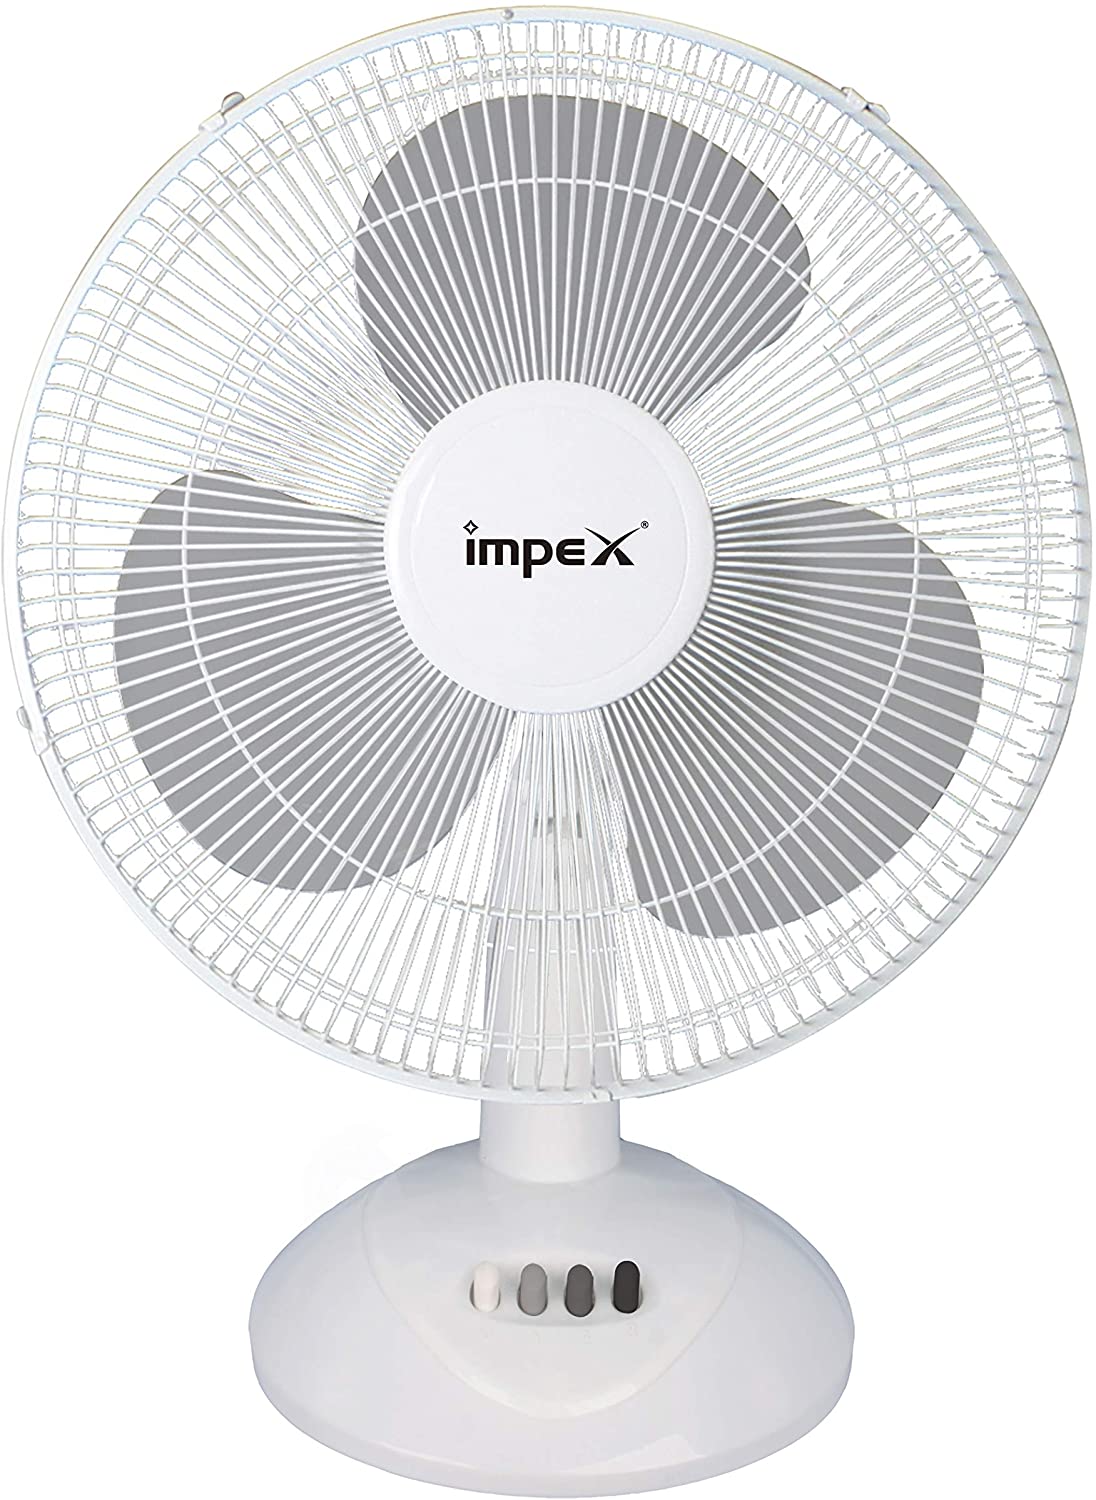 Impex TF-7505 50W 16" 1300 RPM Portable Table Desk Fan with 3 Stage Speed Control 180 Degree Oscillation, 2 Years Warranty, White